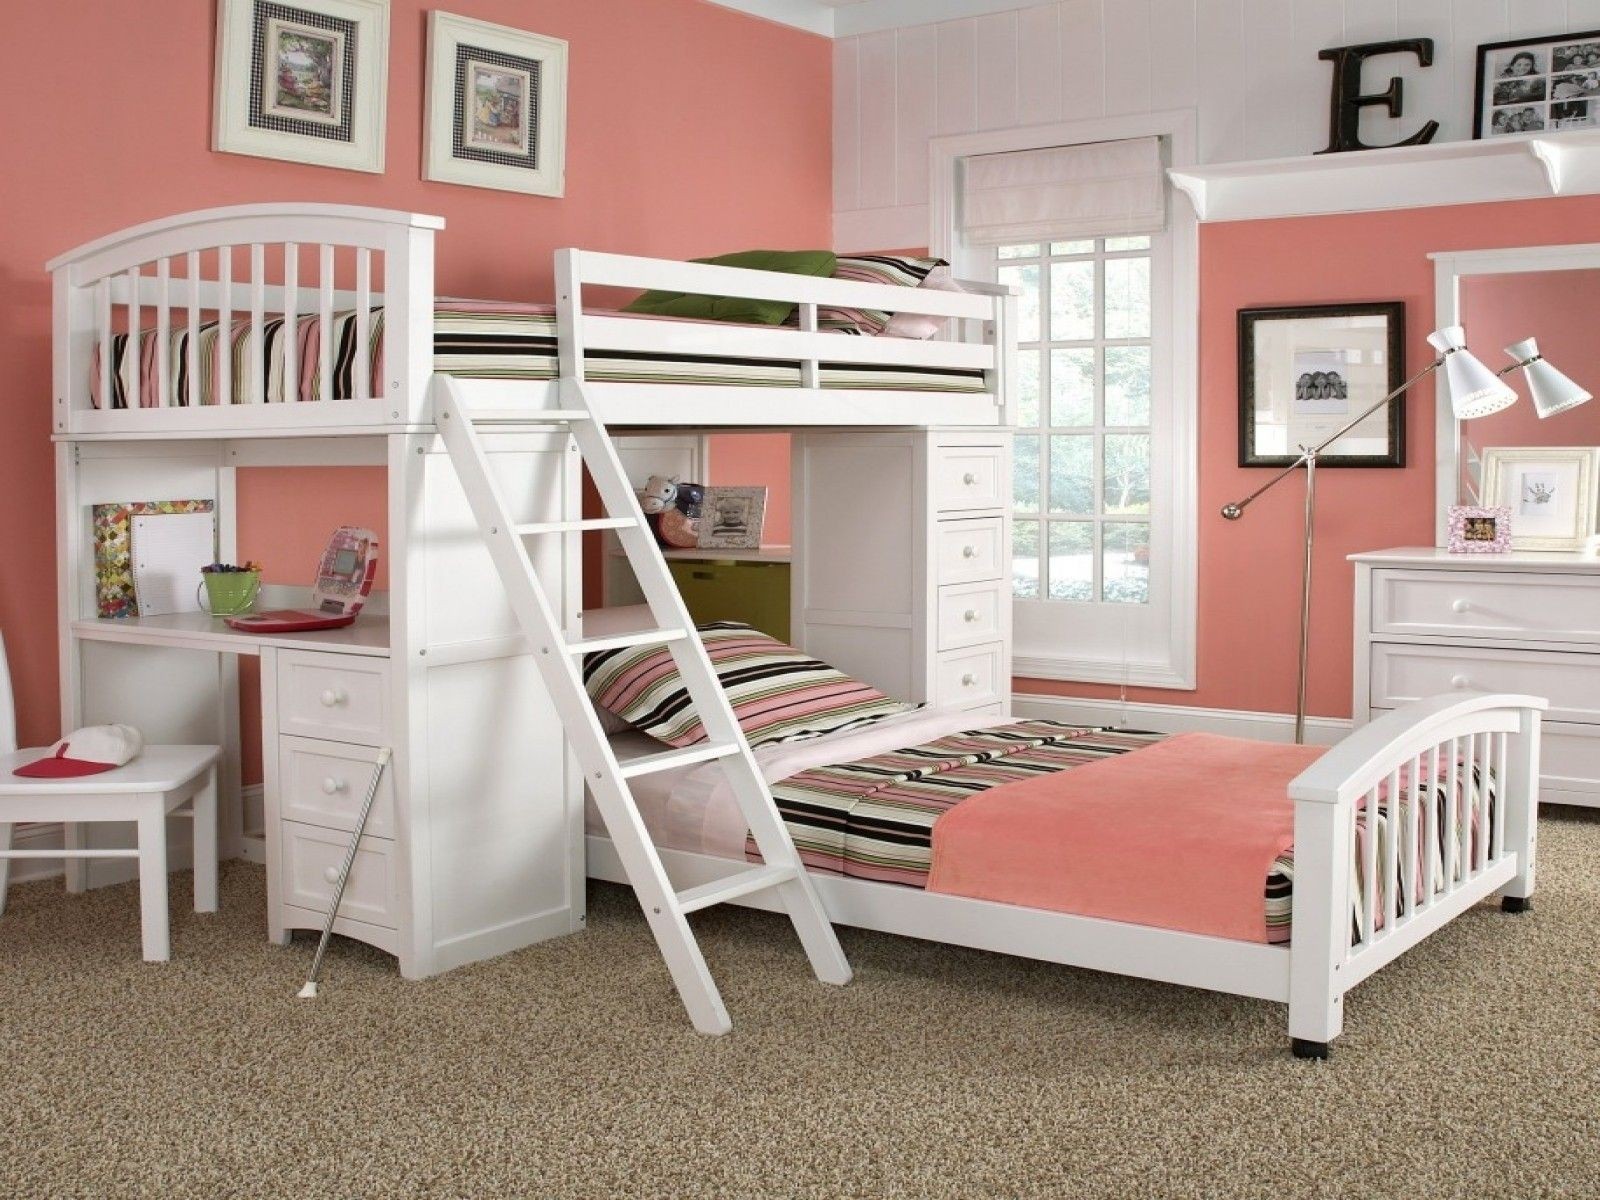 Shaped fold out bunk beds design